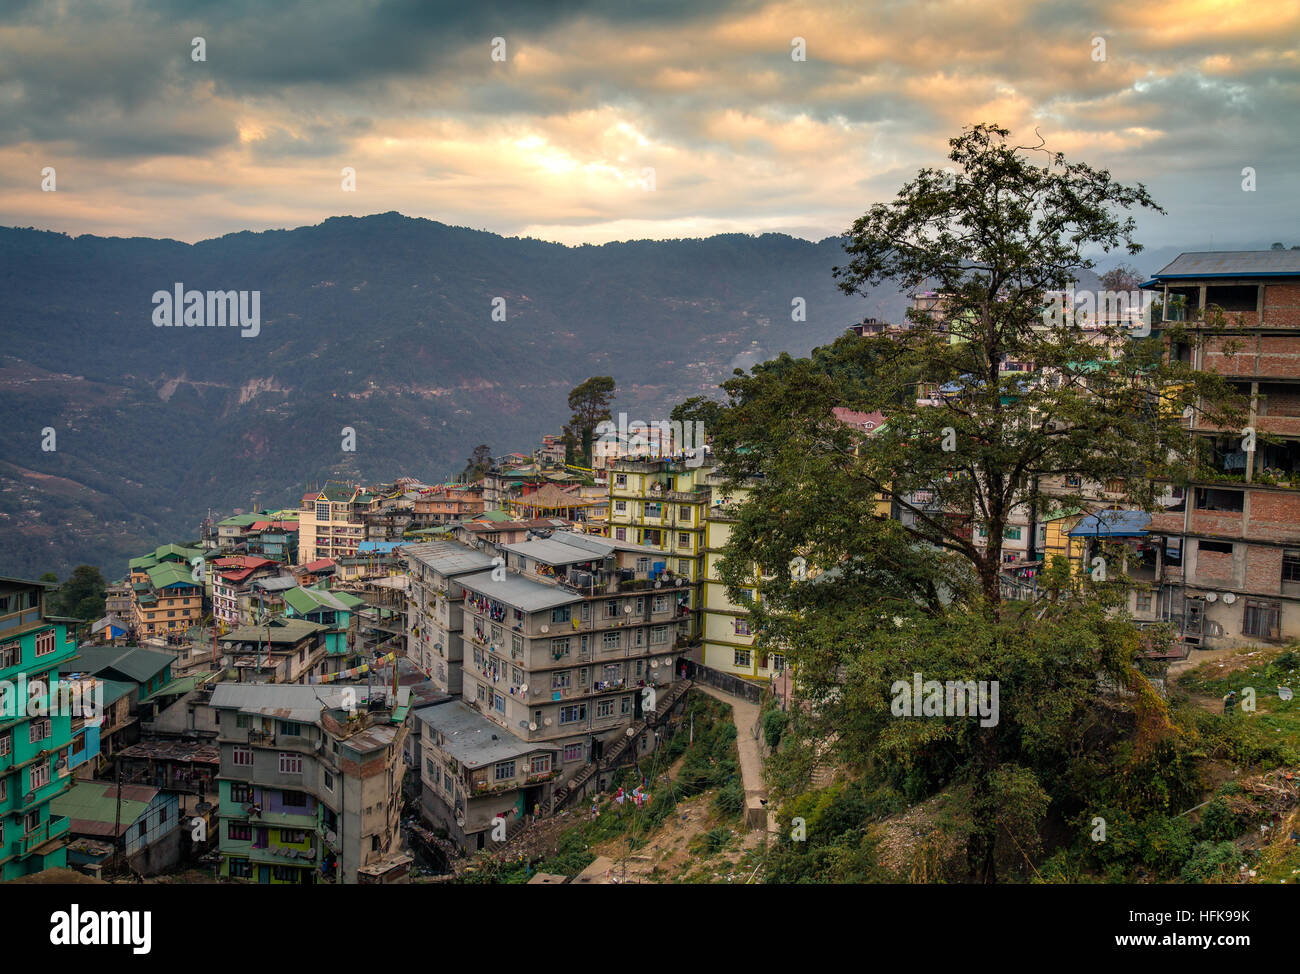 Sunset over Himalayan city of Gangtok, Sikkim, India with vibrant sky distant cliffs and buildings. Stock Photo